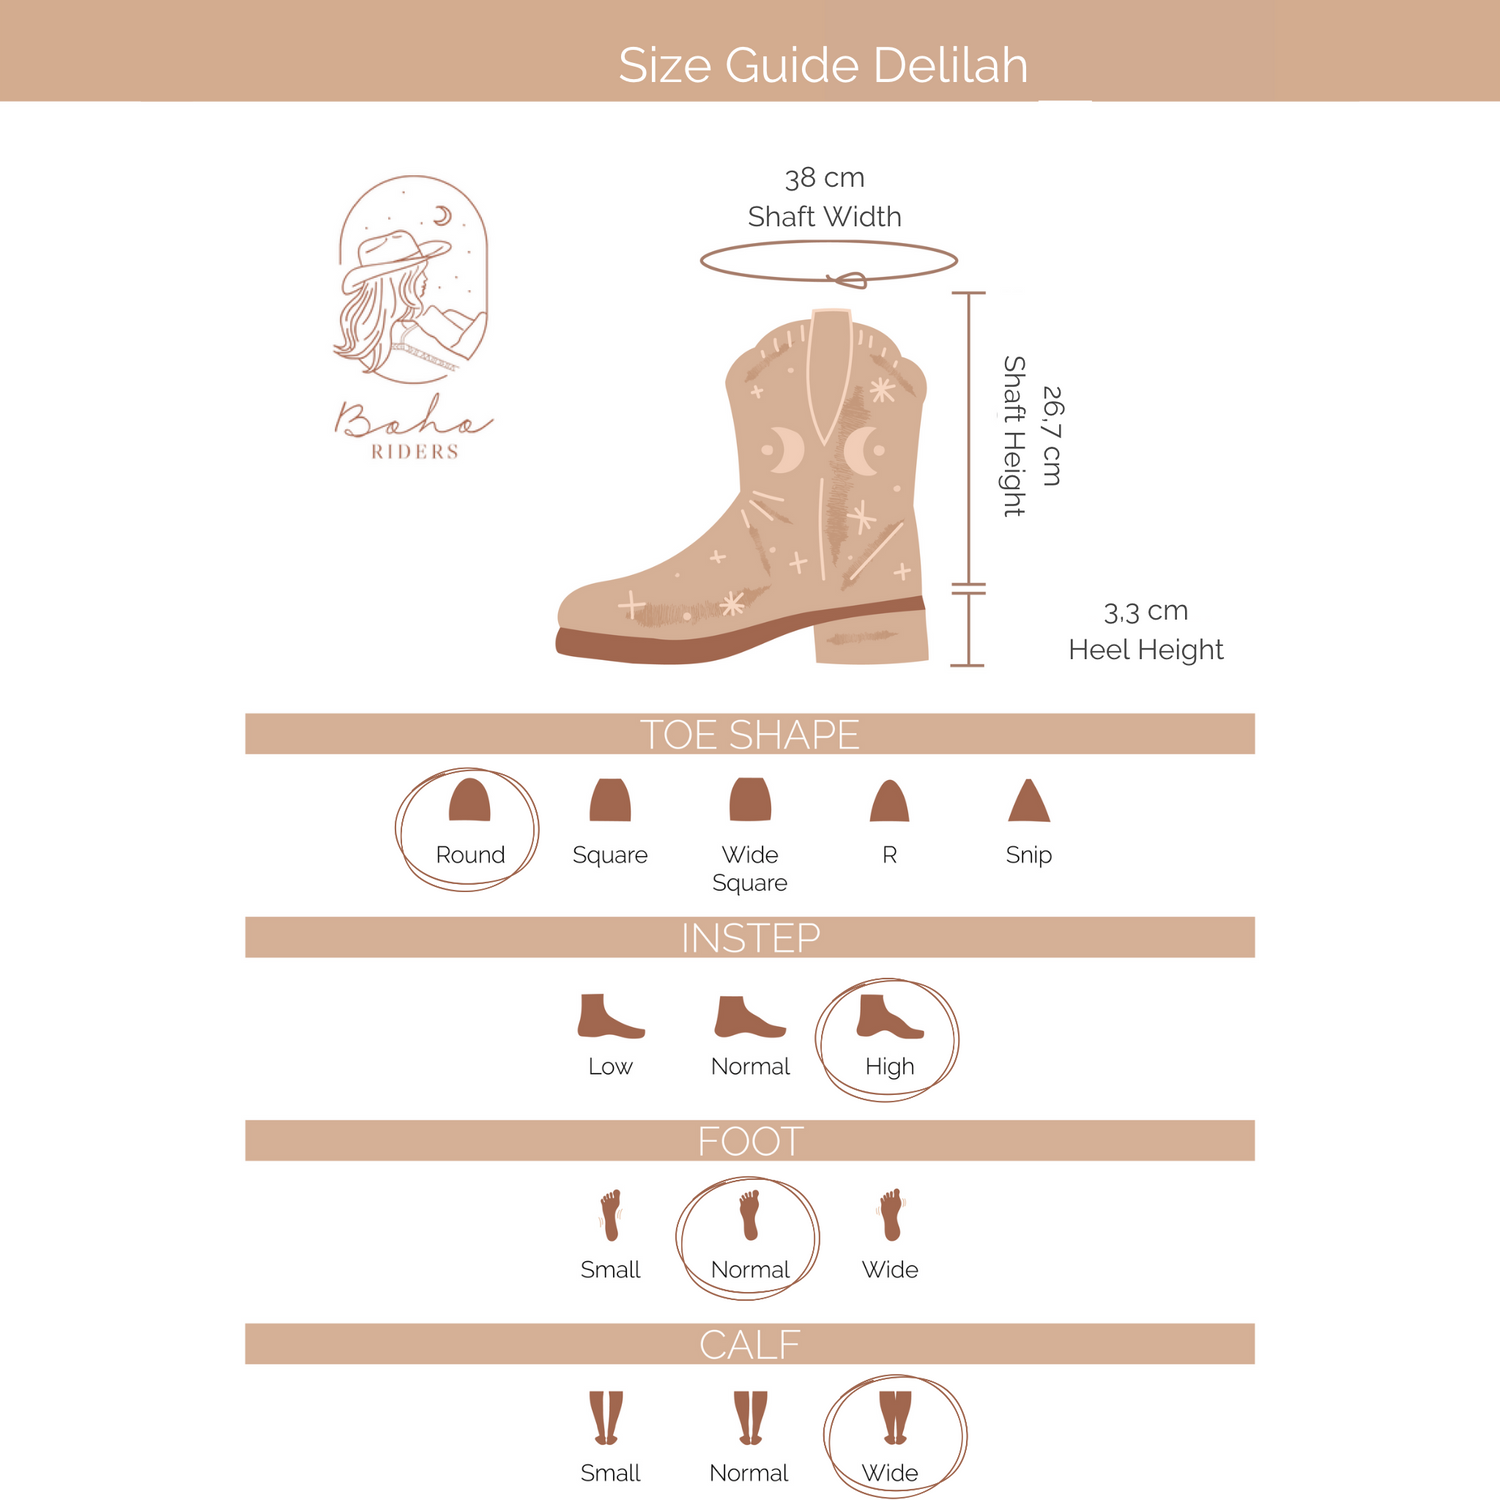 What you want to know about the fit ofAriat Delilah Round Toe H20 Waterproof Western Boot - Riding Boots - Distressed Brown - Waterproof